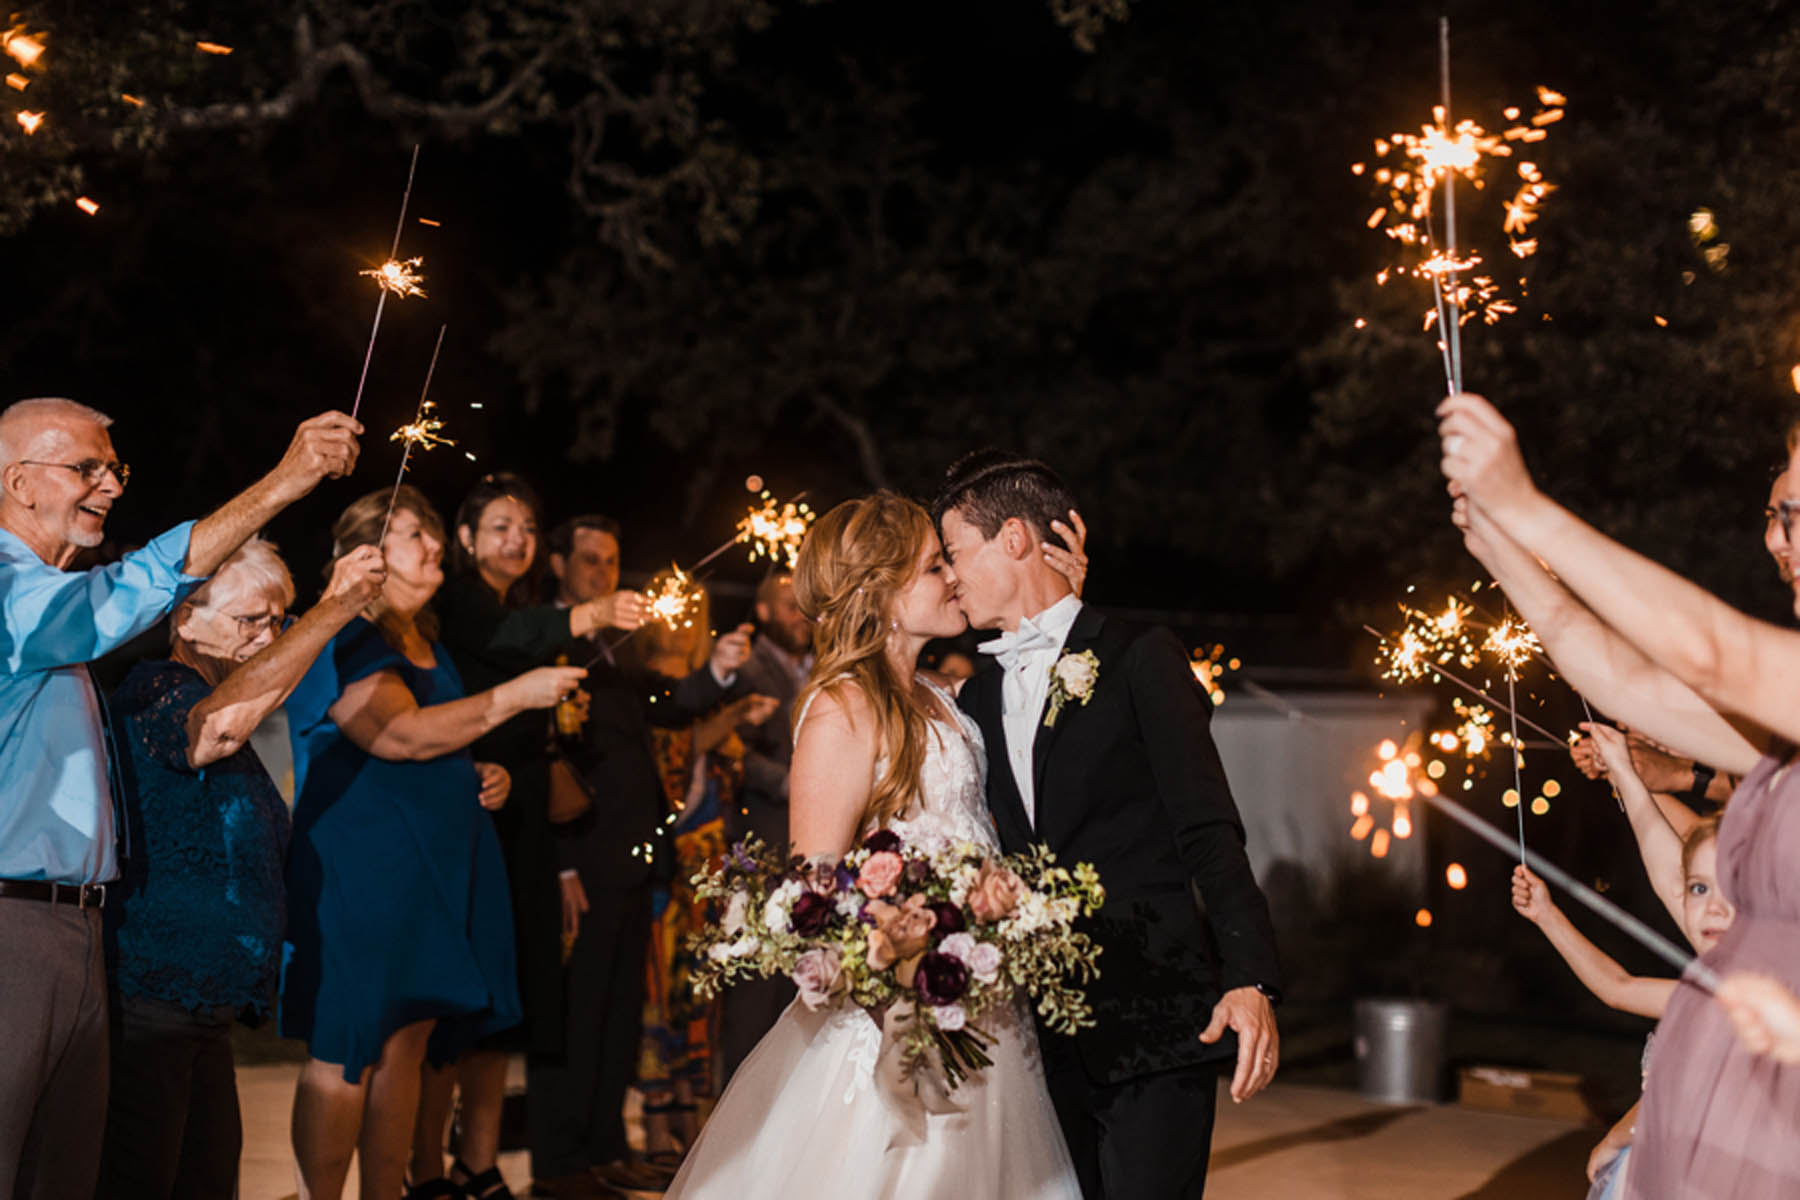 The newlyweds pause for a kiss as they walk down an aisle of their attendants, all holding lit sparklers.